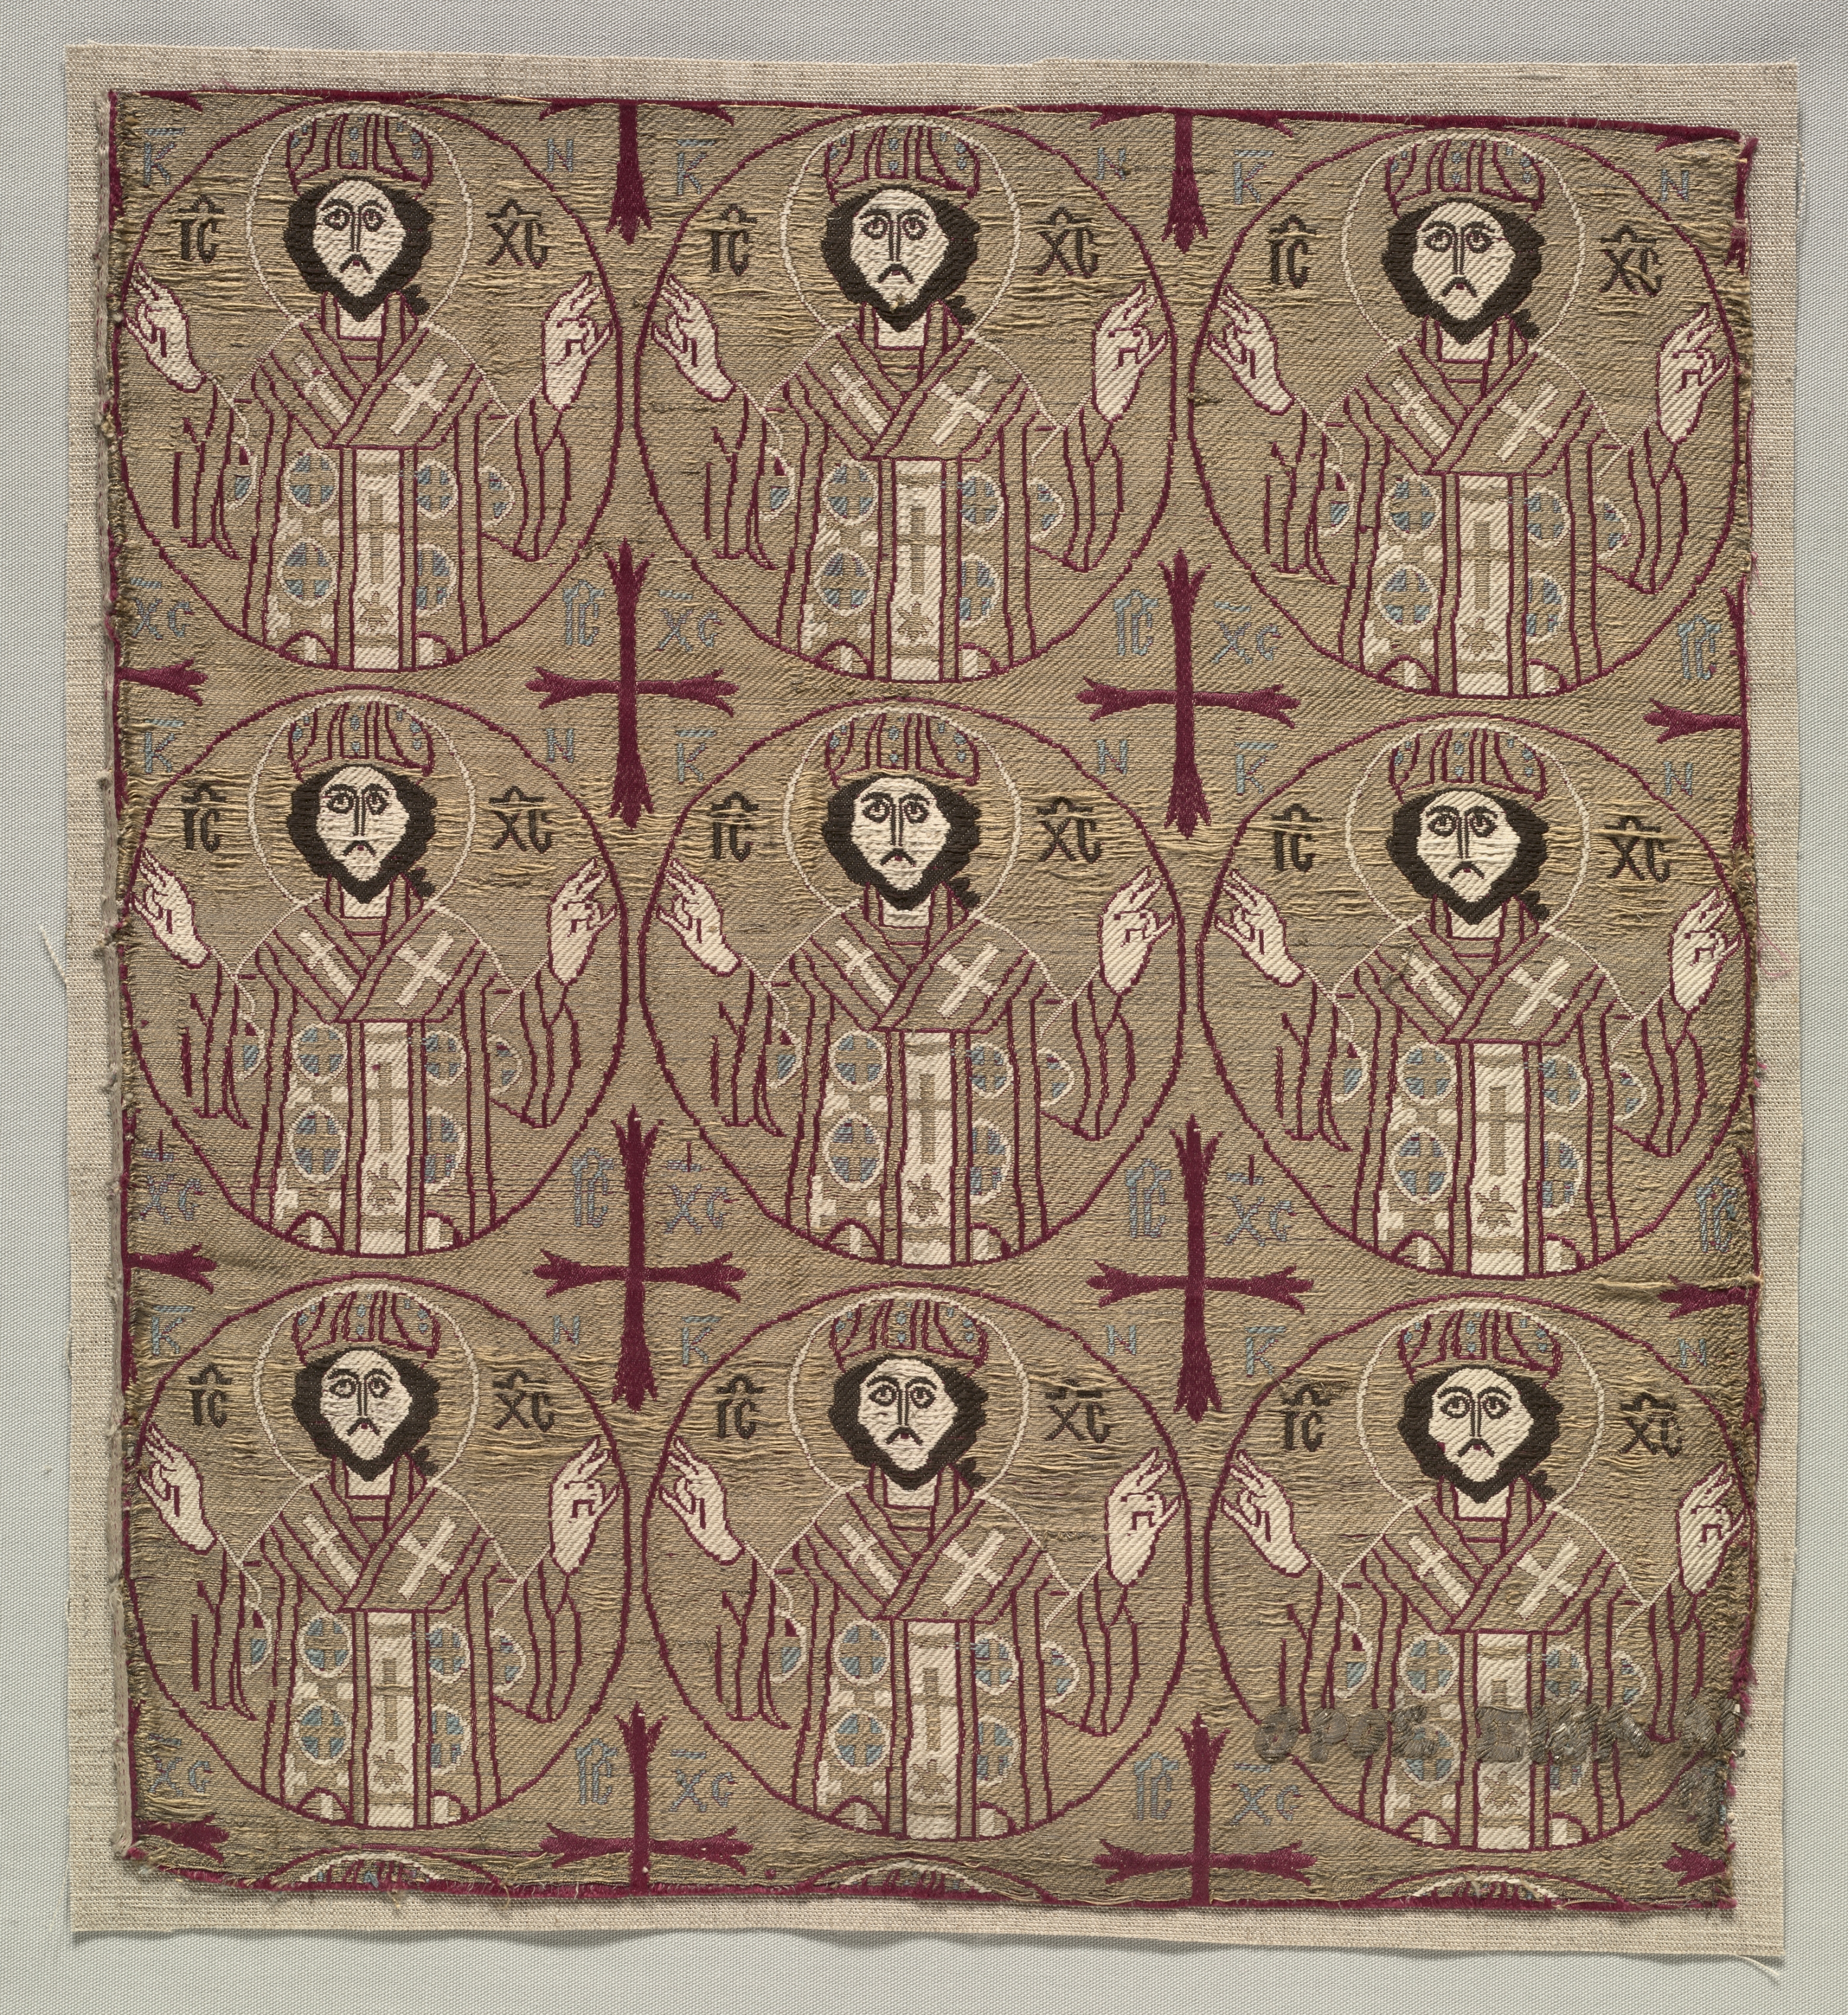 Lampas with roundels of the image of Christ in benedictory pose